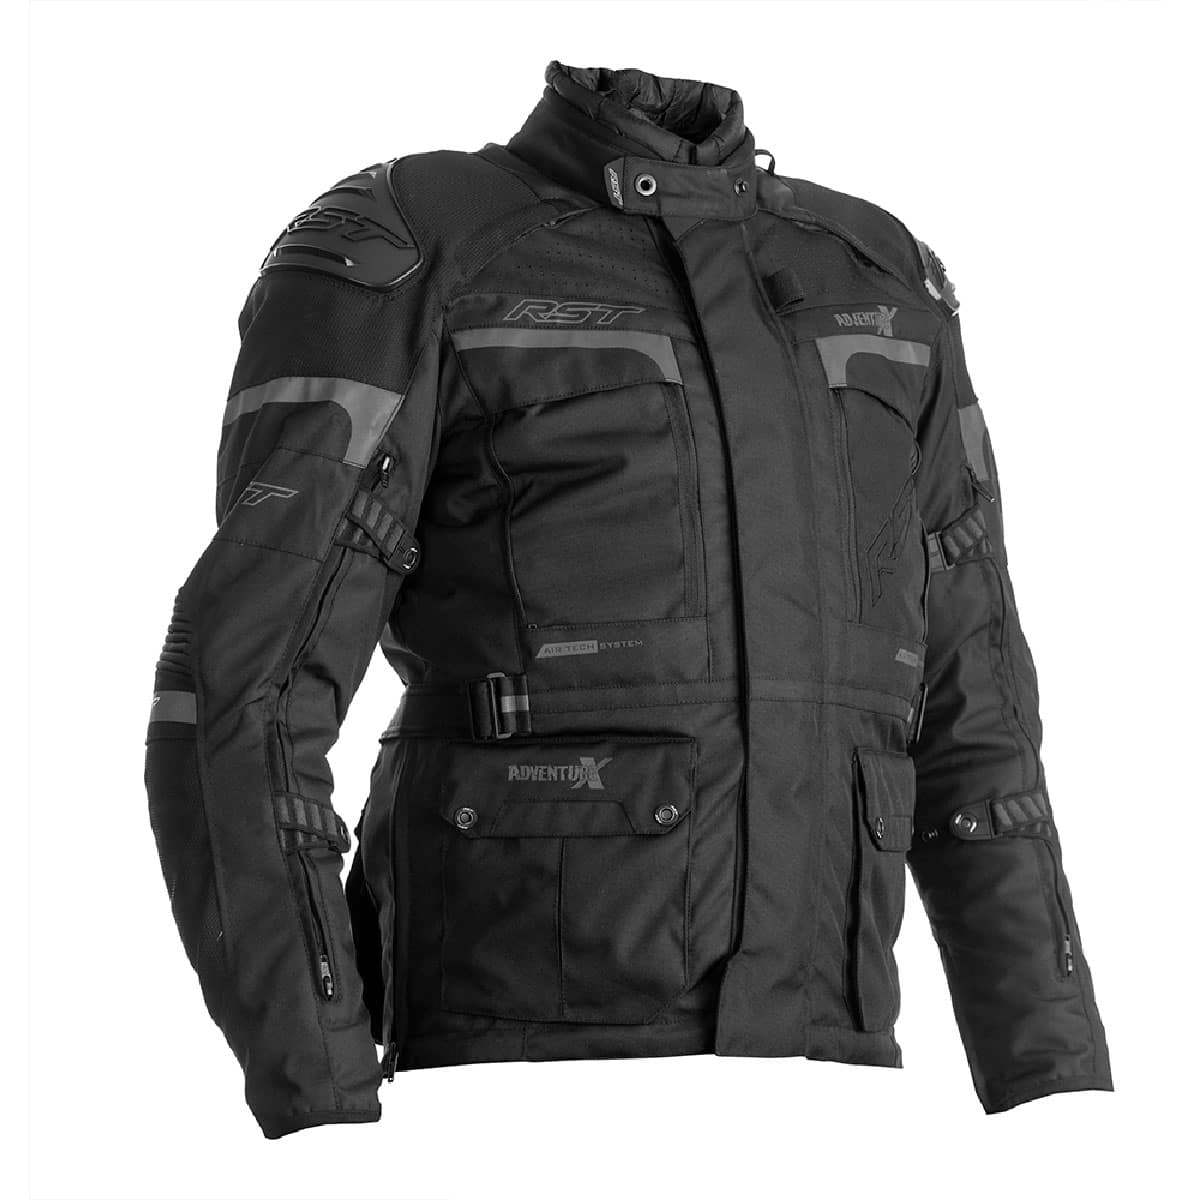 Looking for the ultimate adventure riding experience? Look no further than the RST Pro Series Adventure-X jacket